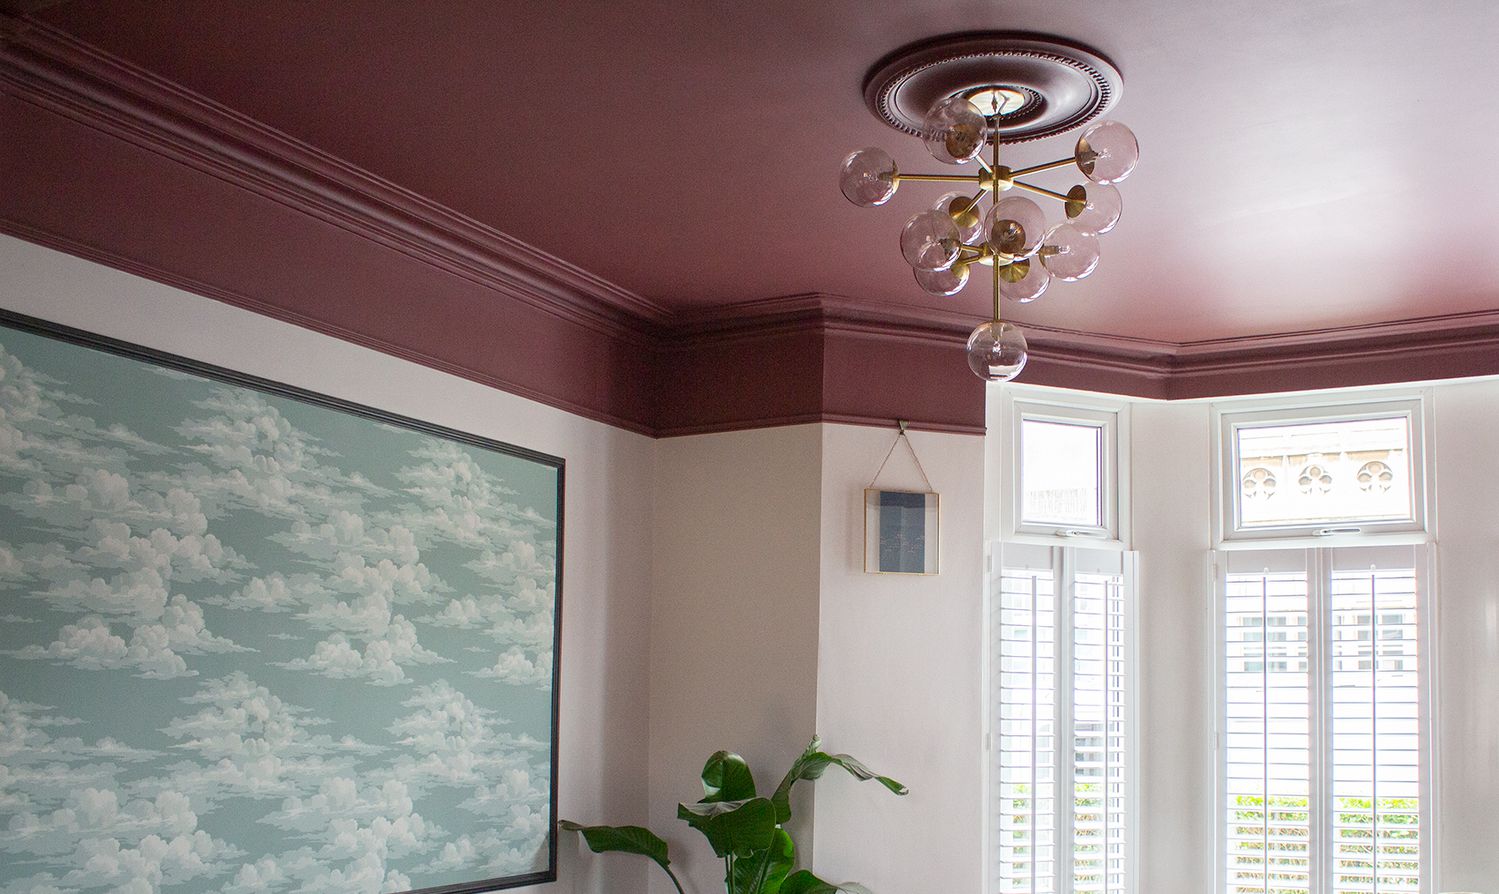 A photo showing the brass and glass ceiling light against the burgundy painted ceiling.